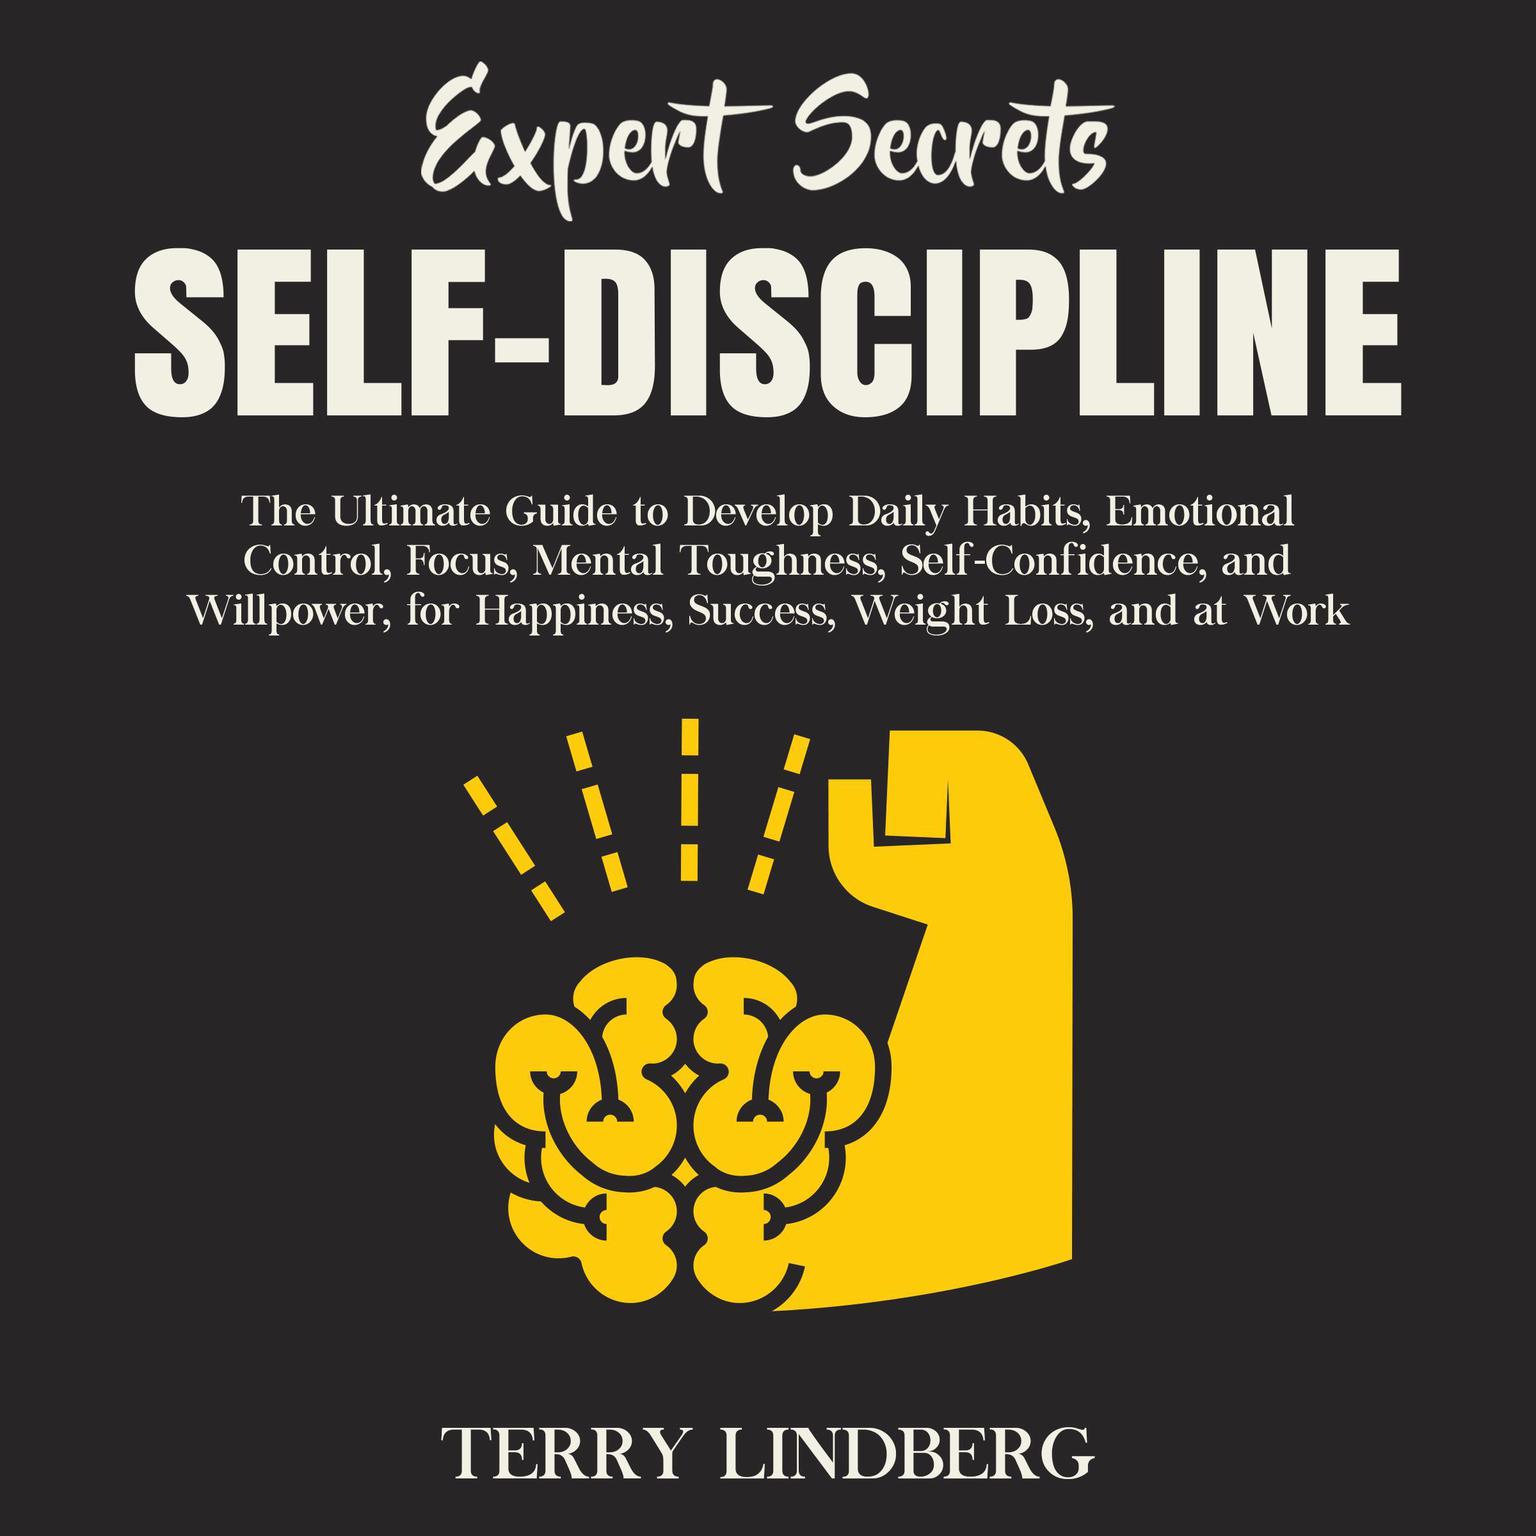 Expert Secrets – Self-Discipline: The Ultimate Guide to Develop Daily Habits, Emotional Control, Focus, Mental Toughness, Self-Confidence, and Willpower, for Happiness, Success, Weight Loss, and at Work. Audiobook, by Terry Lindberg